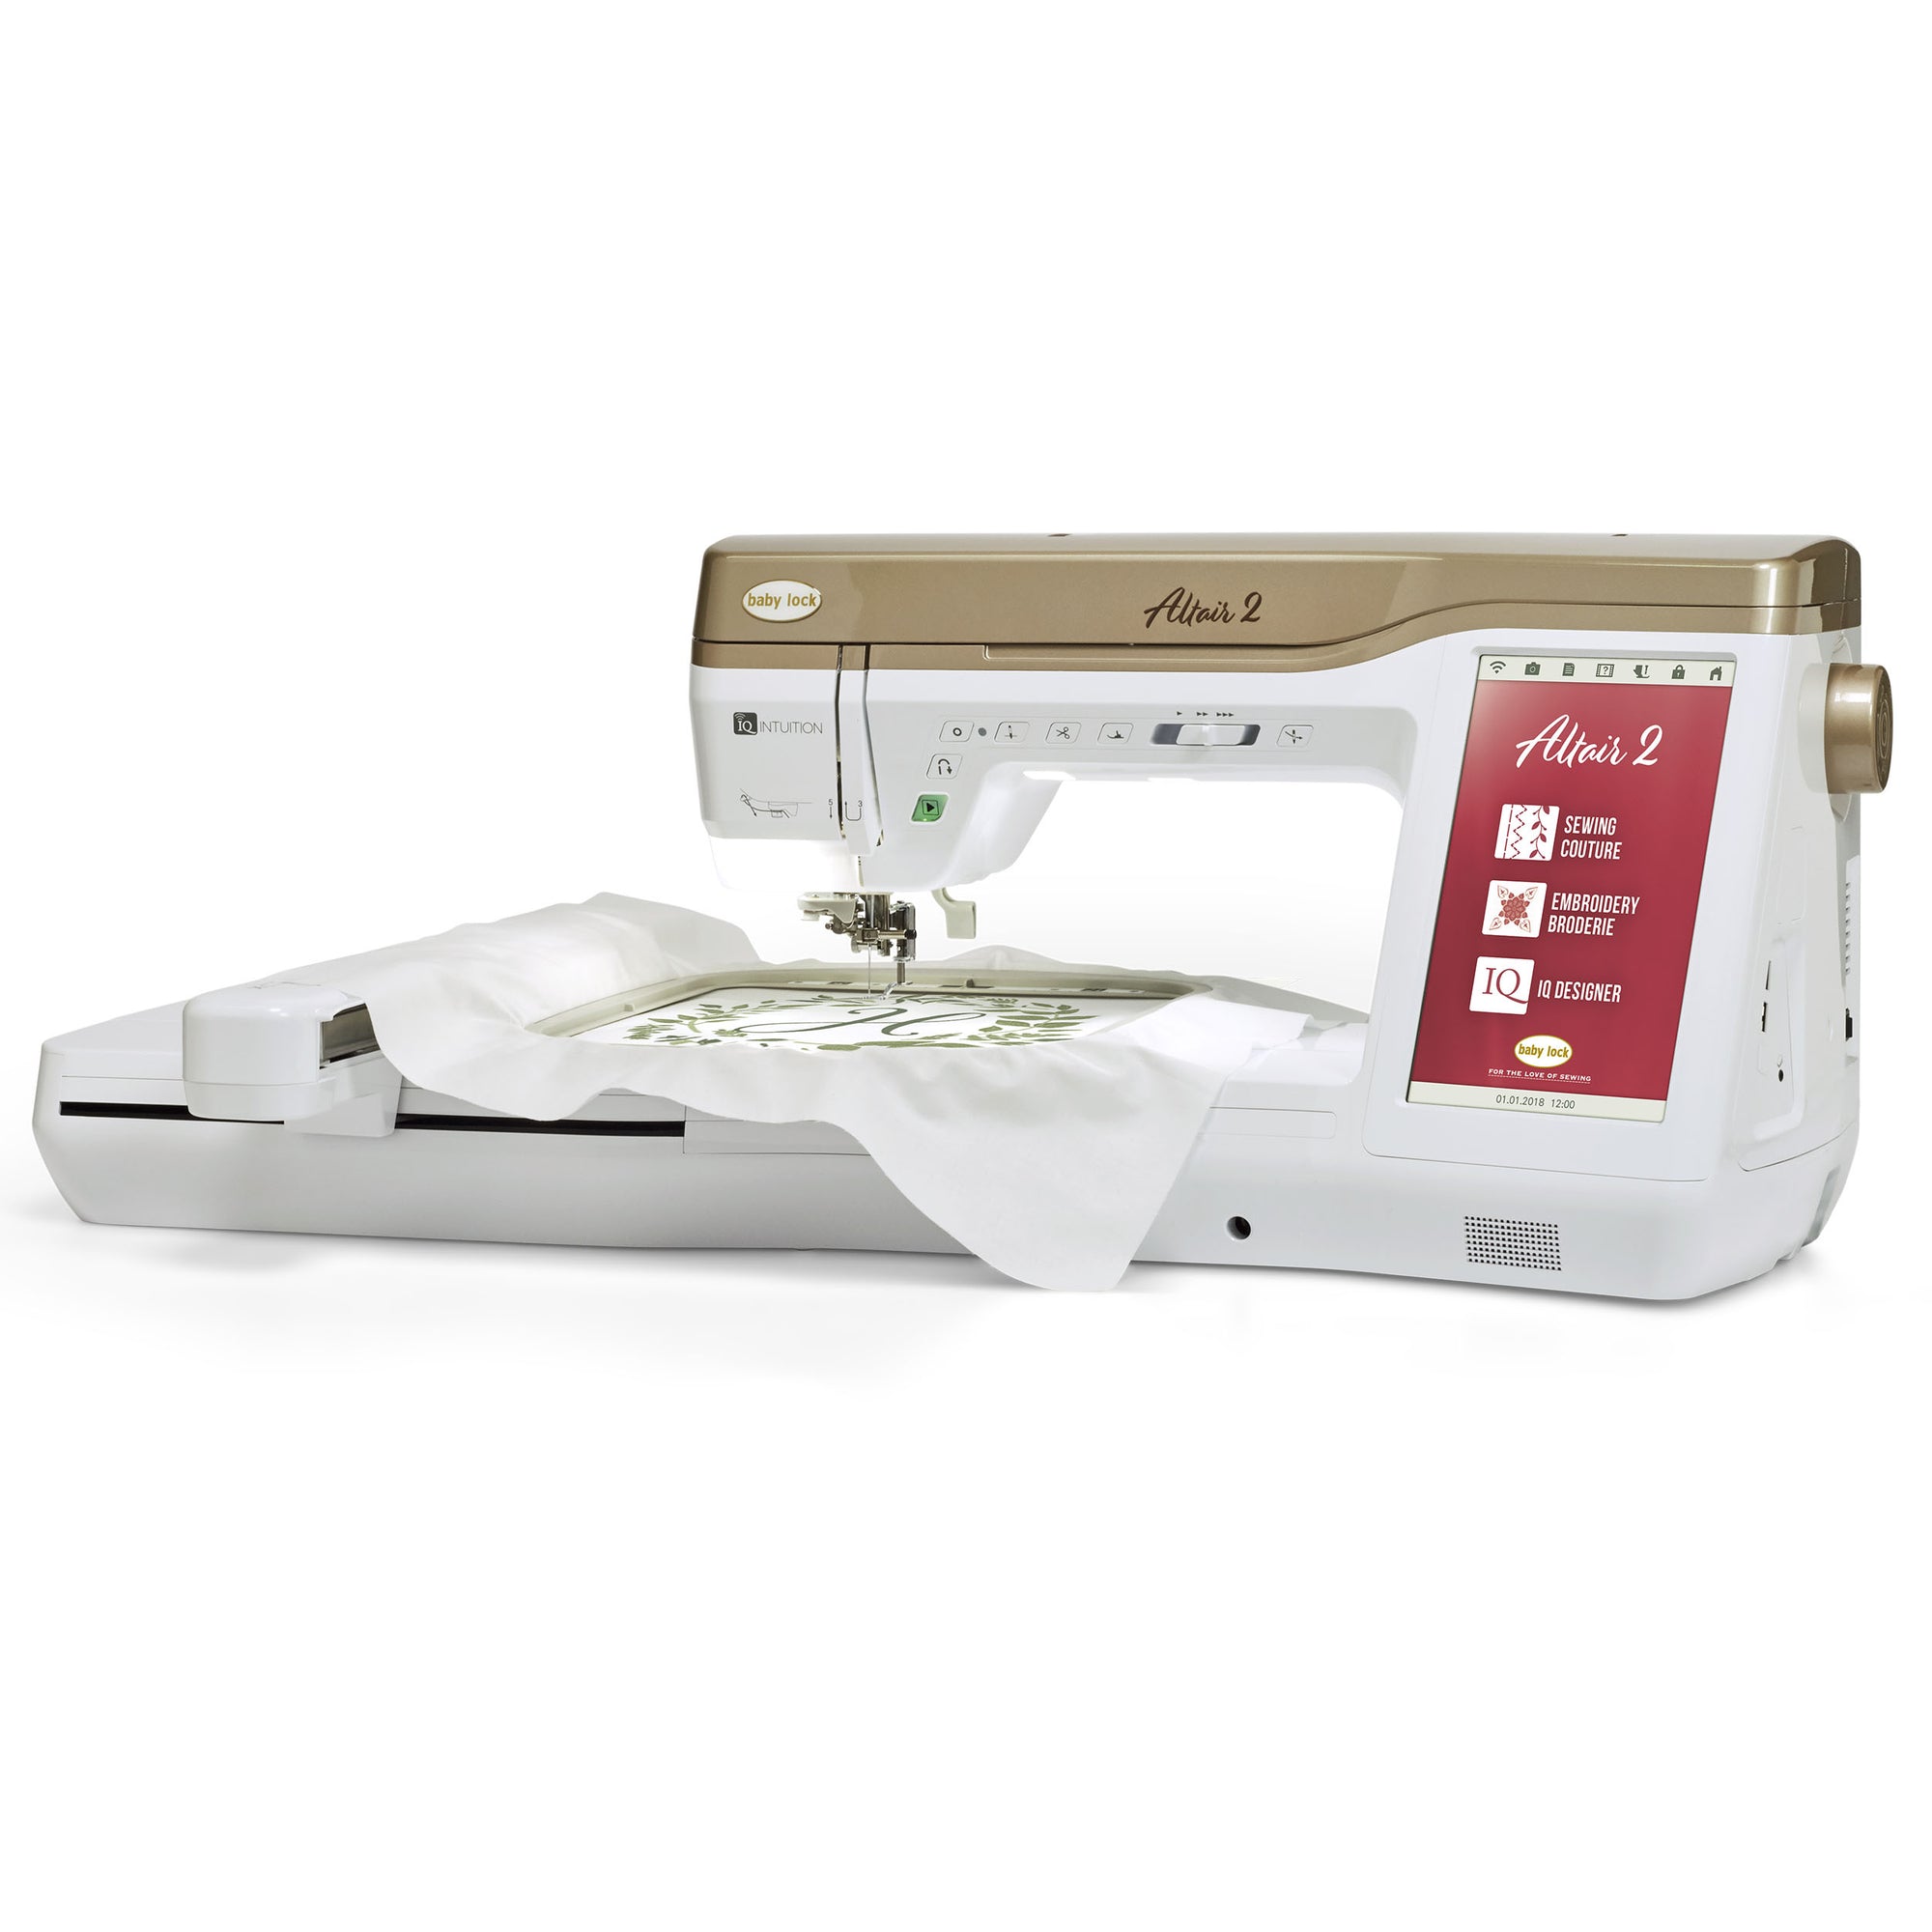 (B) Baby Lock Altair 2 Sewing and Embroidery Machine